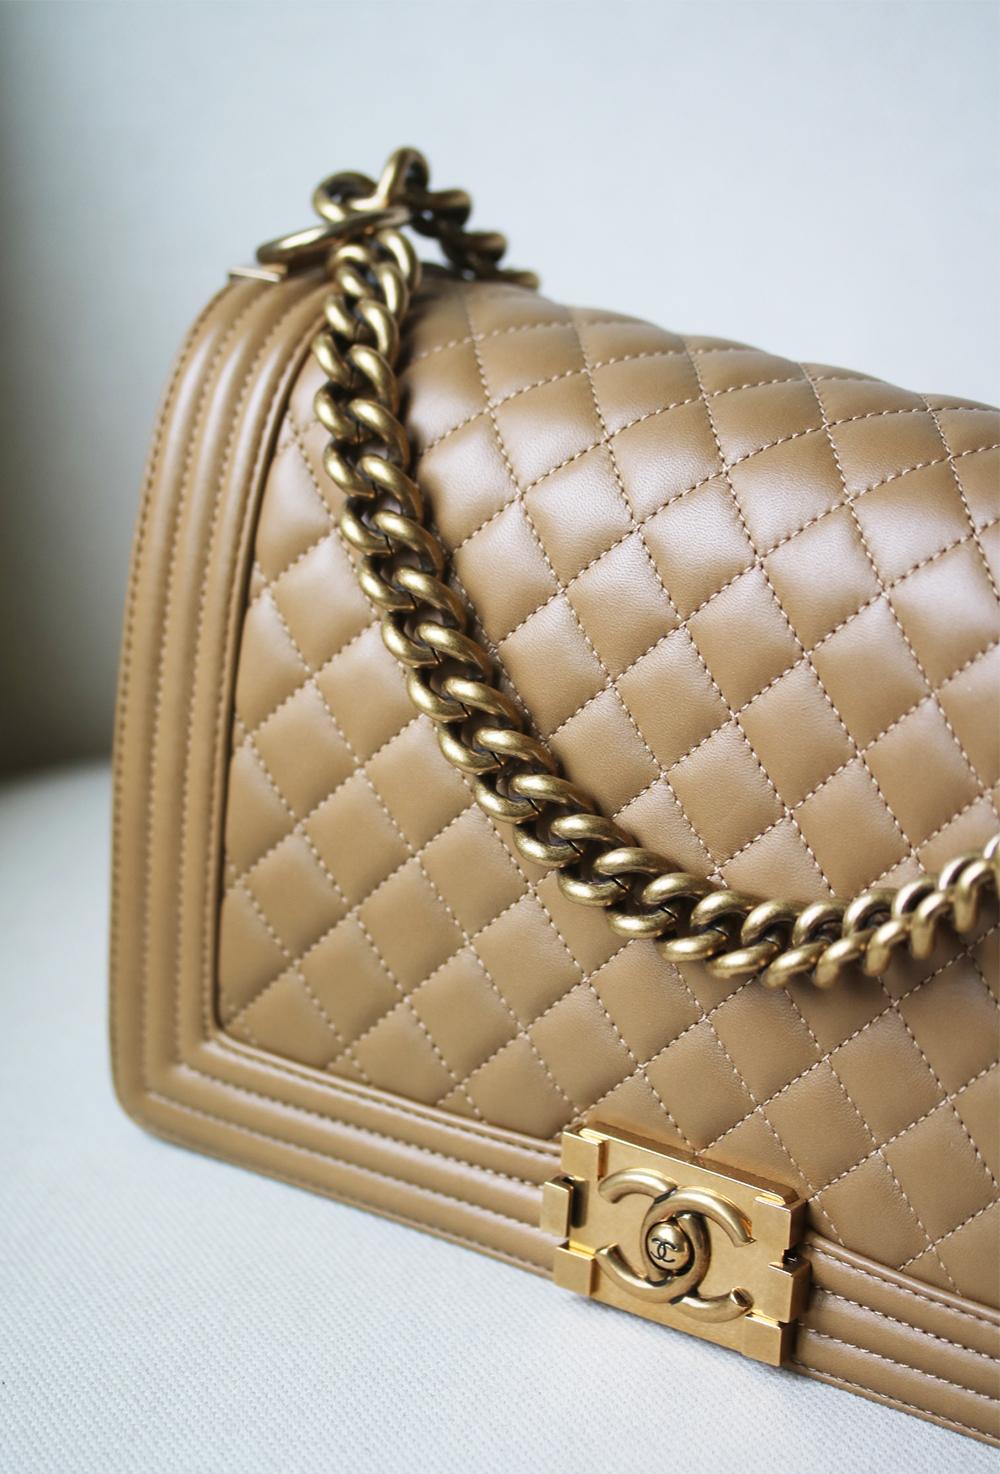 Chanel Quilted Leather Boy Bag. Adjustable shoulder strap in leather and matte gold-tone metal. Features coffee colour leather. Tonal canvas lining. Flap compartments. Zip interior pocket. Made in Italy. Does not come with a dustbag or box.